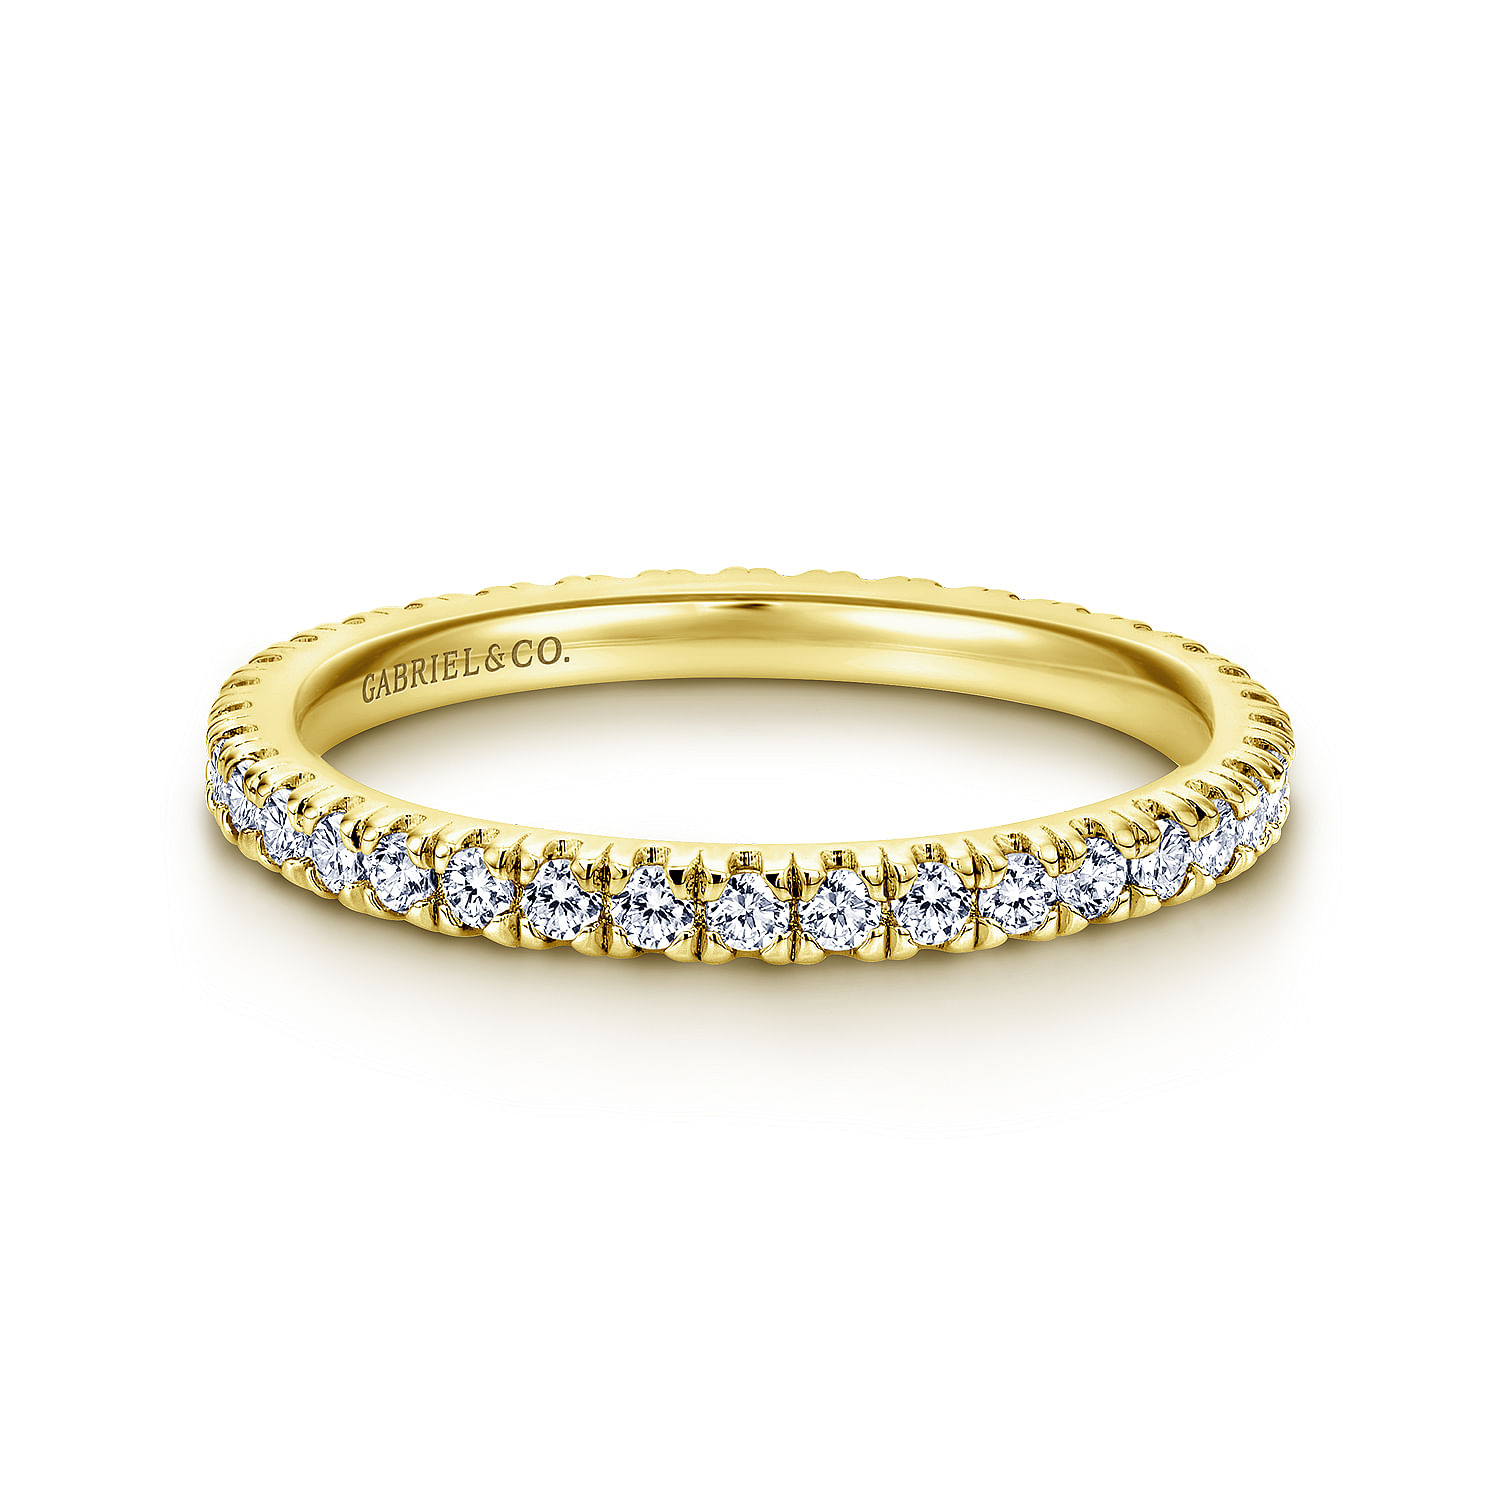 Avignon - French Pave  Eternity Diamond Ring in 14K Yellow Gold